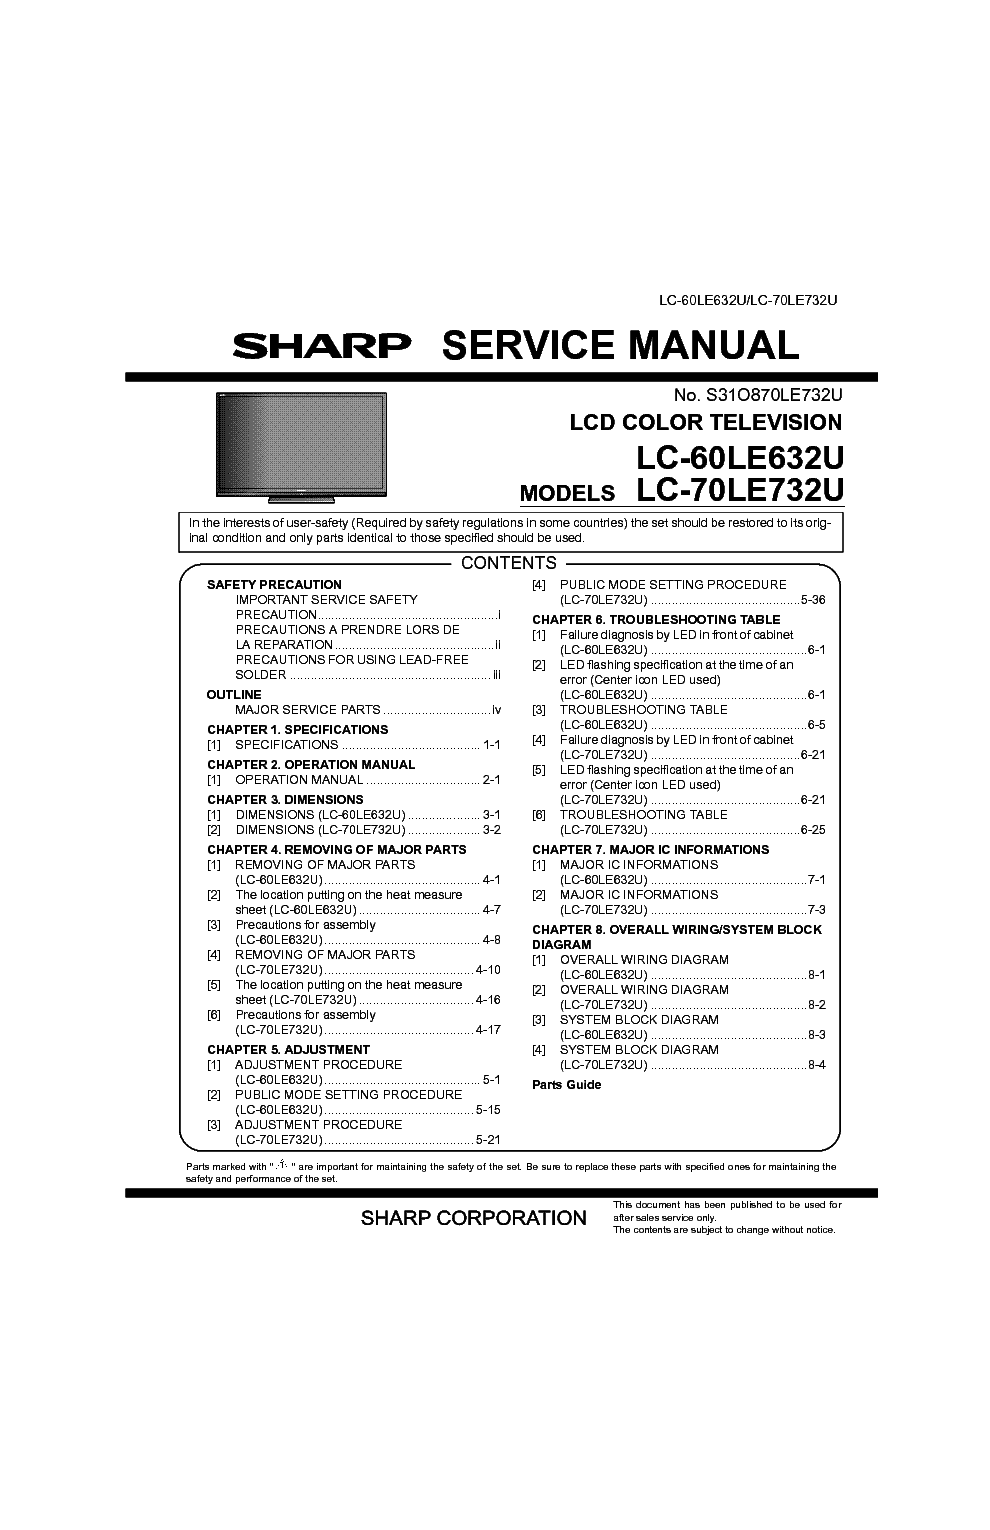 SHARP LC-60LE632U LC-70LE732U EXCLUDING PWB service manual (1st page)